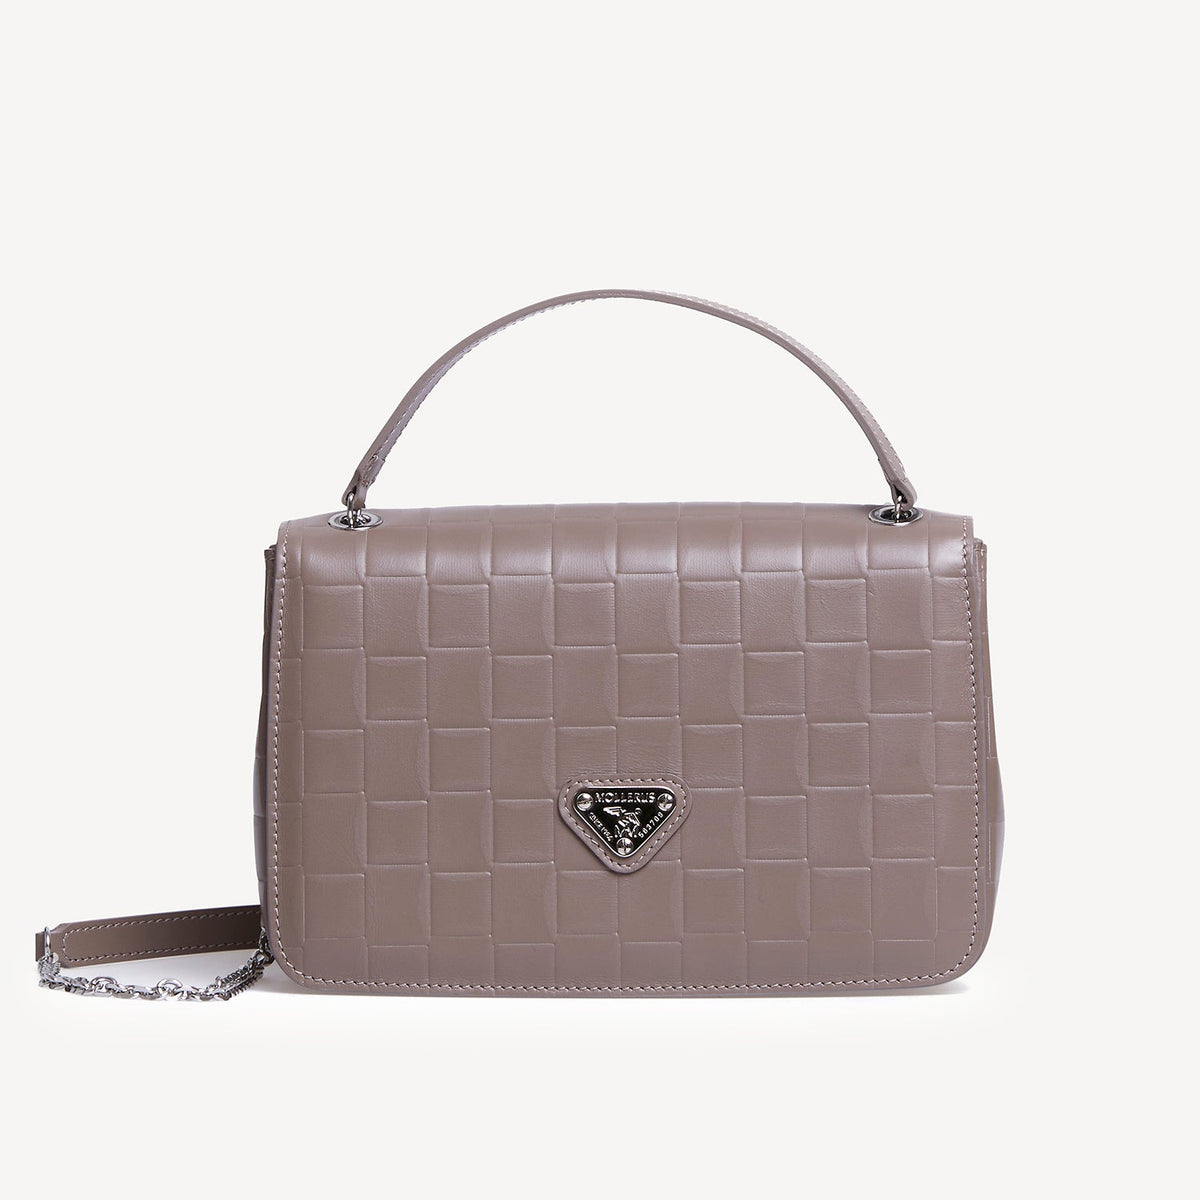 BIASCA | shoulder bag woven embossing taupe gray / silver